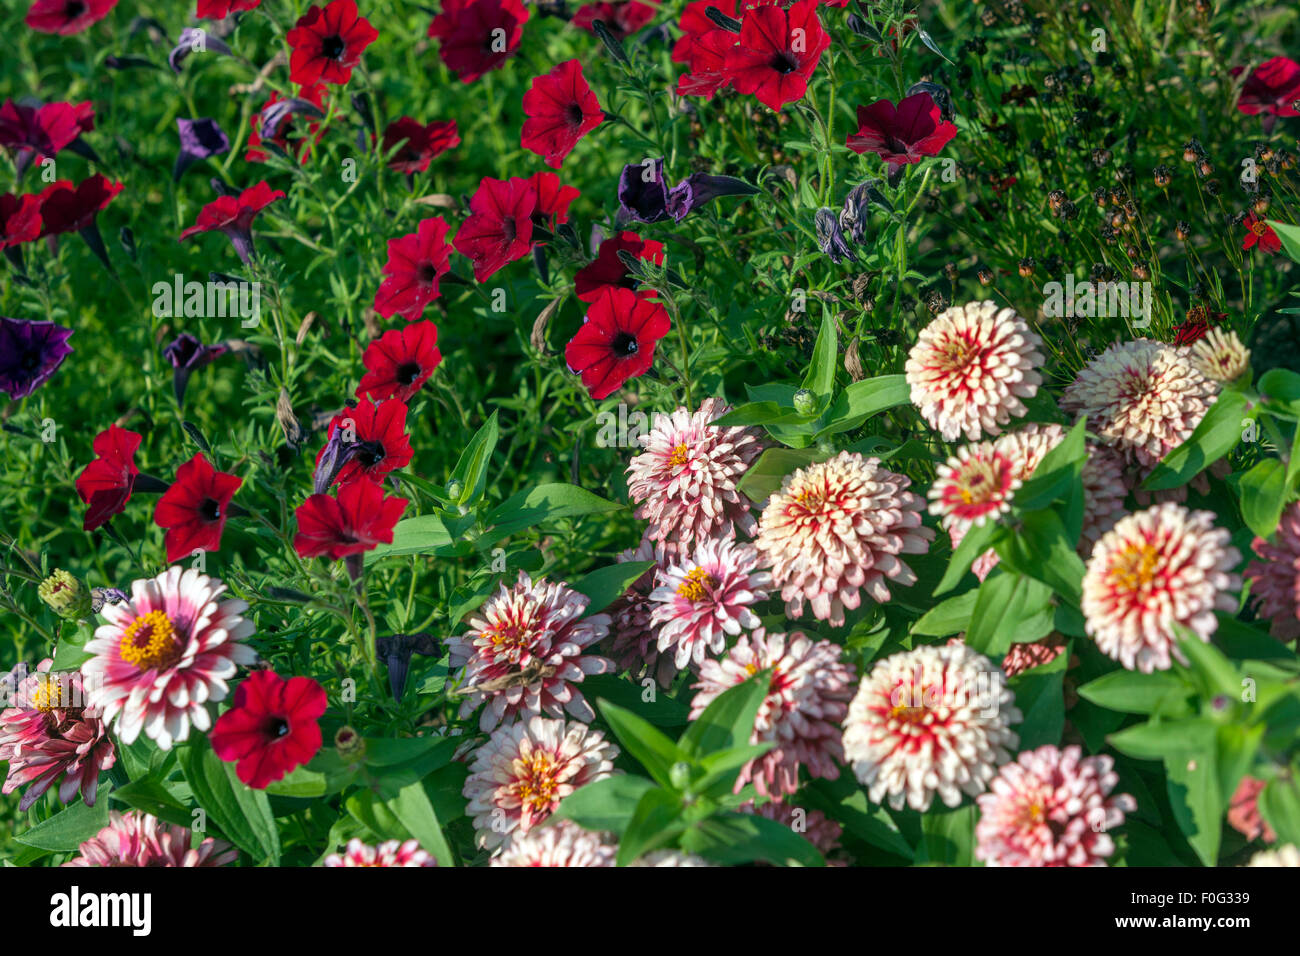 Zinnia elegans ´Swizzle Cherry Ivory´  and red petunia flowers, garden flower bed, summer bedding plants Stock Photo